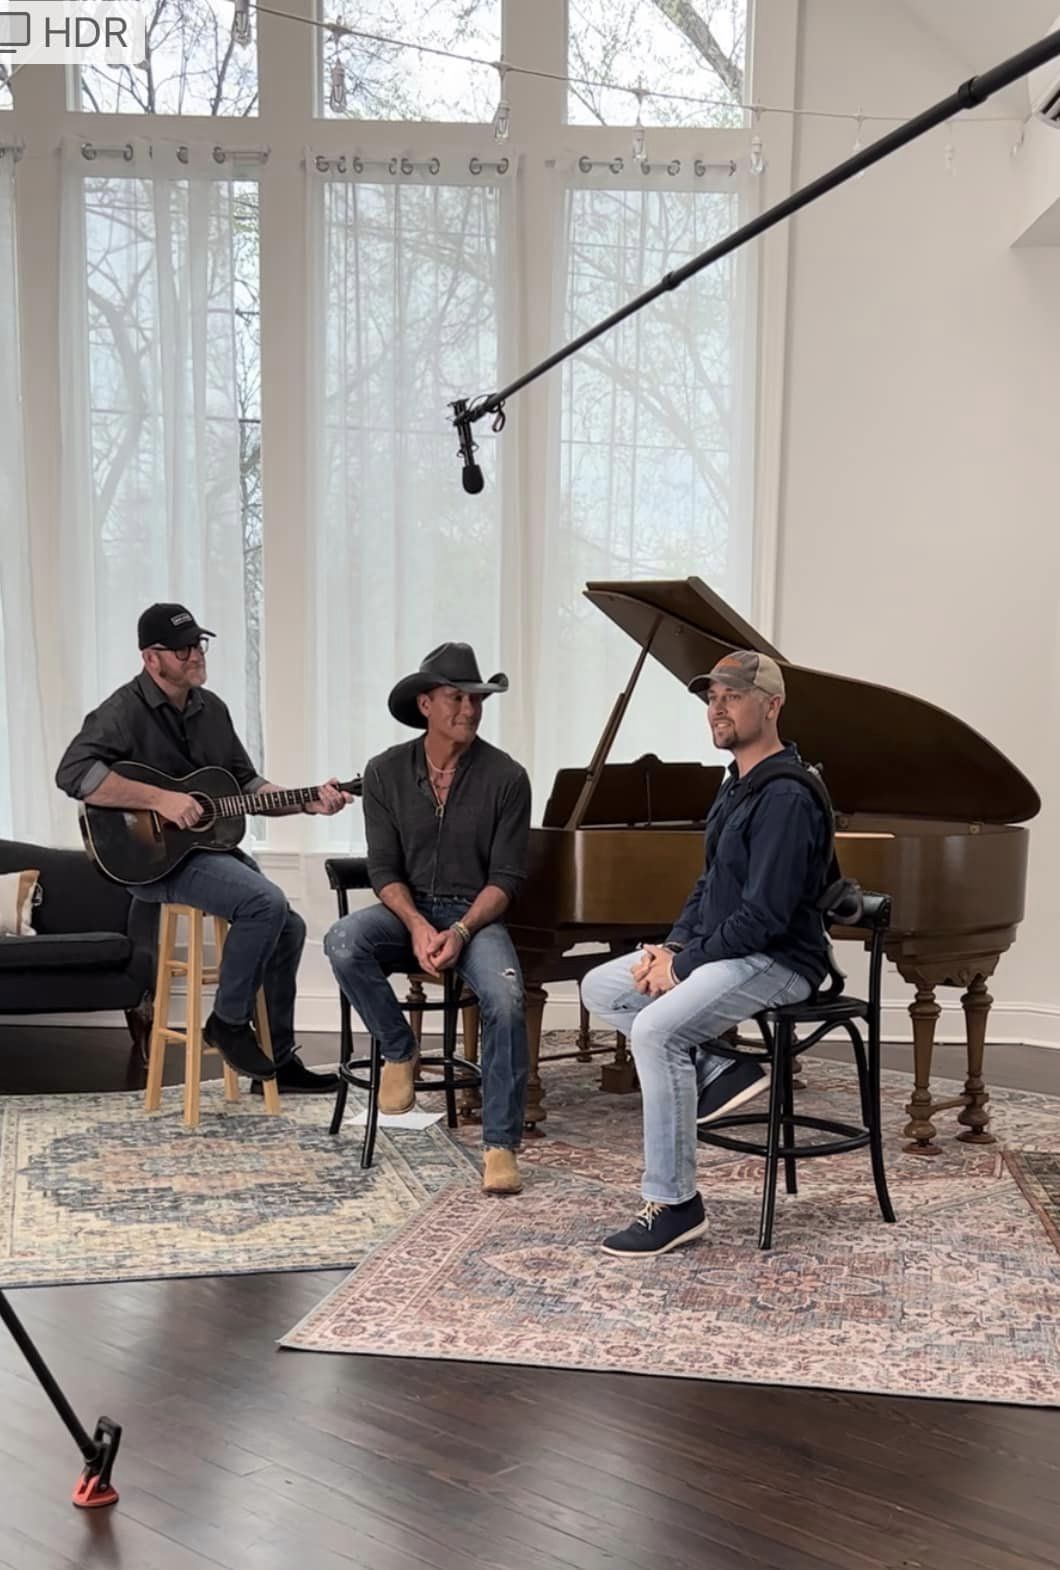 Tim McGraw sits with guitar player and Michael Hugo in Nashville, TN.